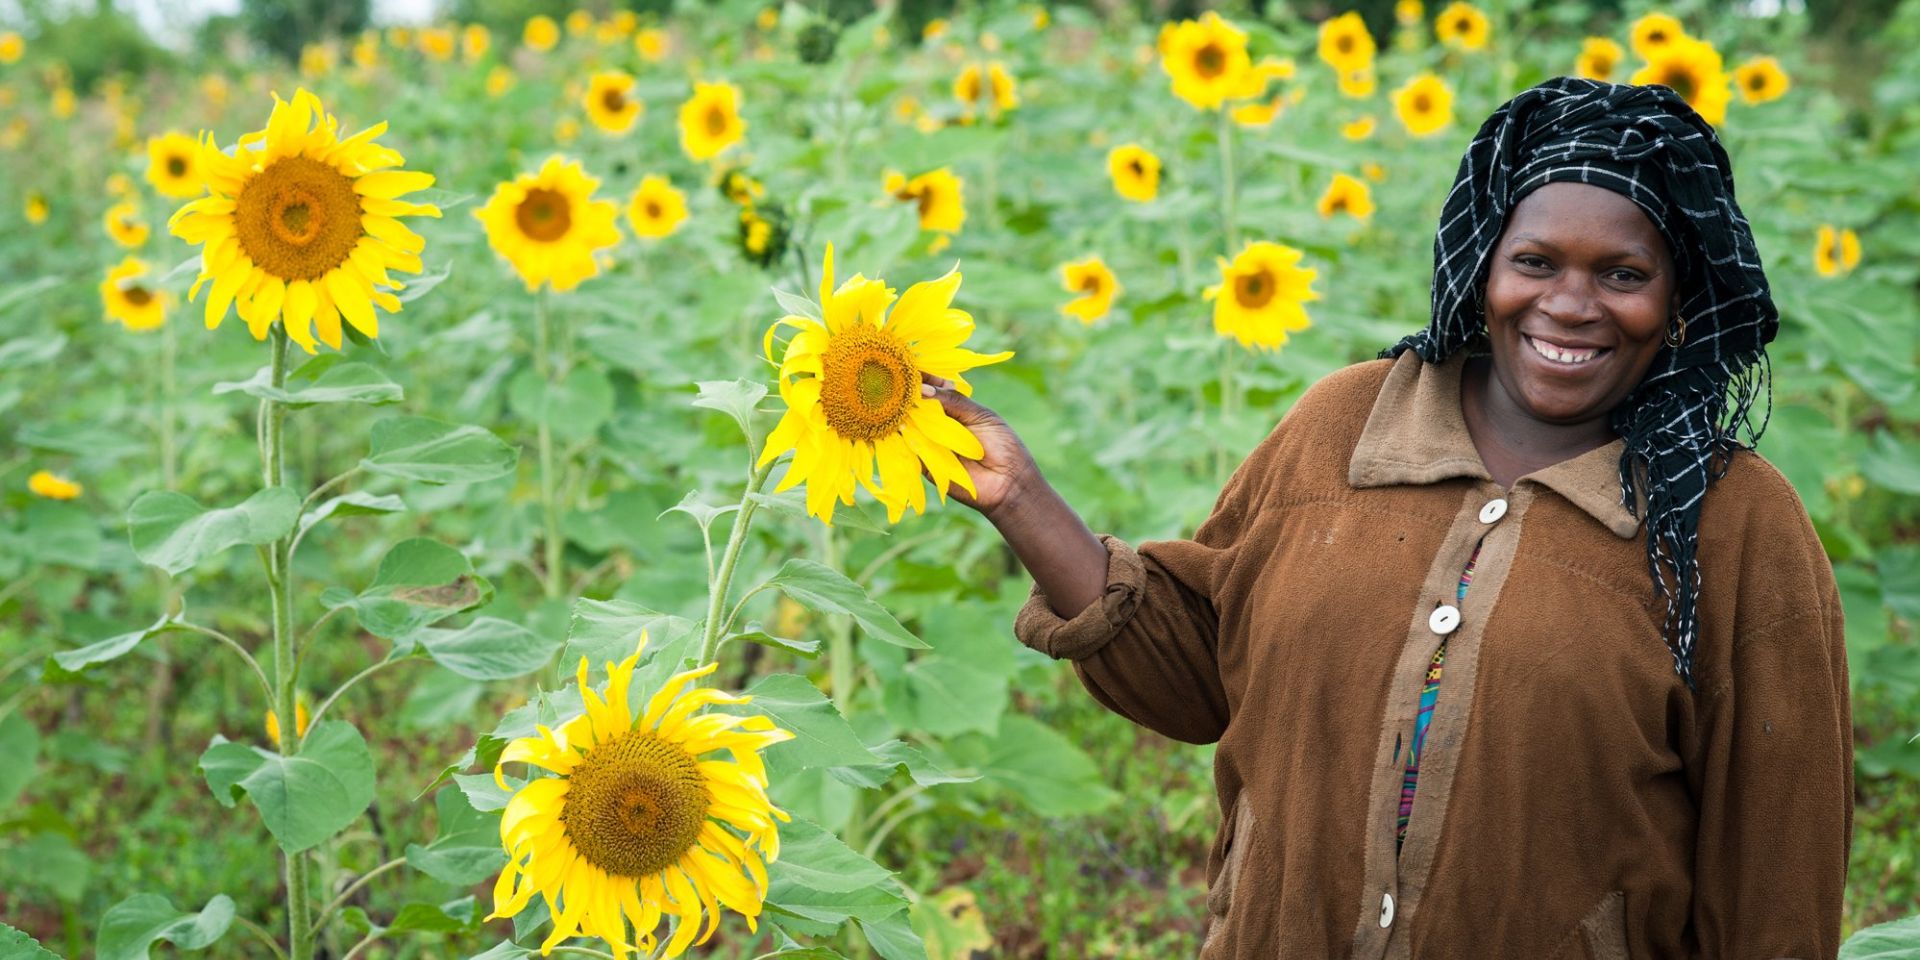 Female farmer showing off her sunflowers